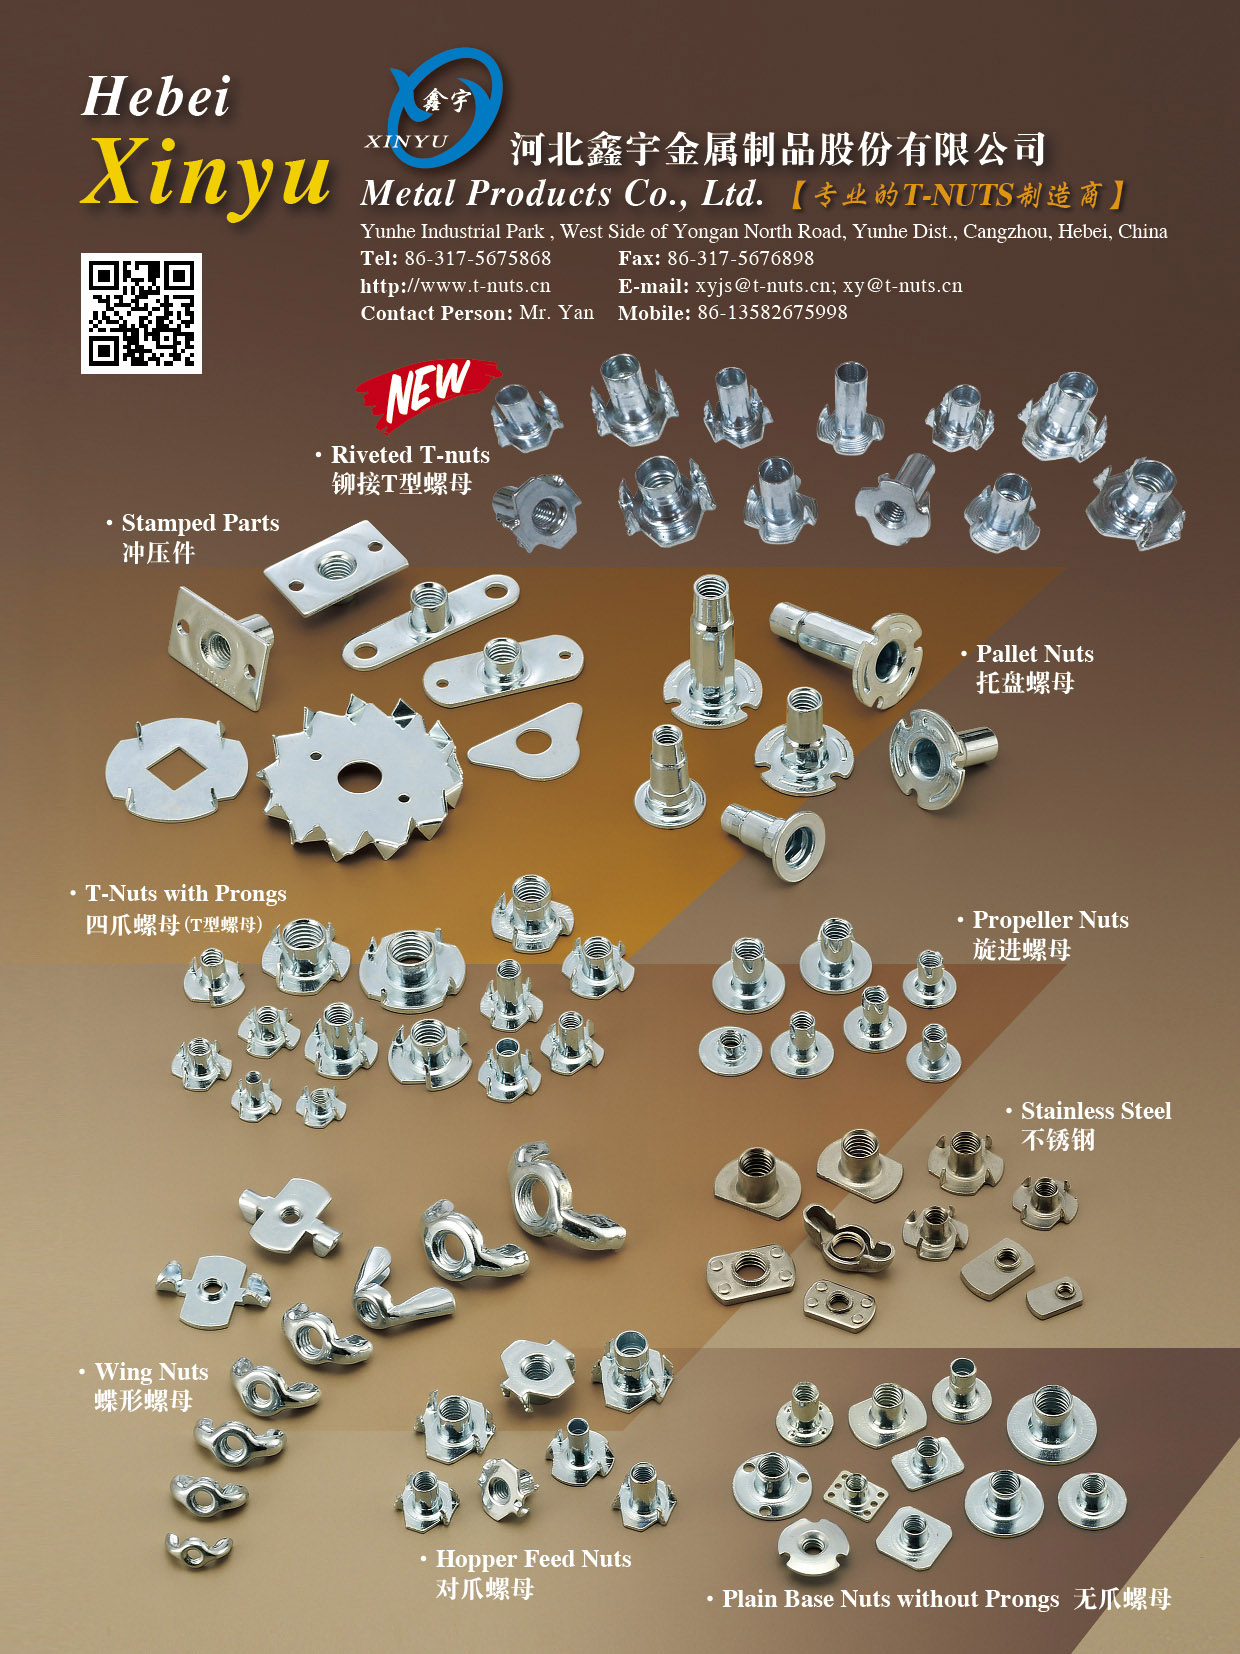 HEBEI XINYU METAL PRODUCTS CO., LTD. , Riveted T-nuts, Stamped Parts, T-Nuts with Prongs, Wing Nuts, Hopper Feed Nuts, Pallet Nuts, Propeller Nuts, Stainless Steel, Plain Base Nuts without Prongs